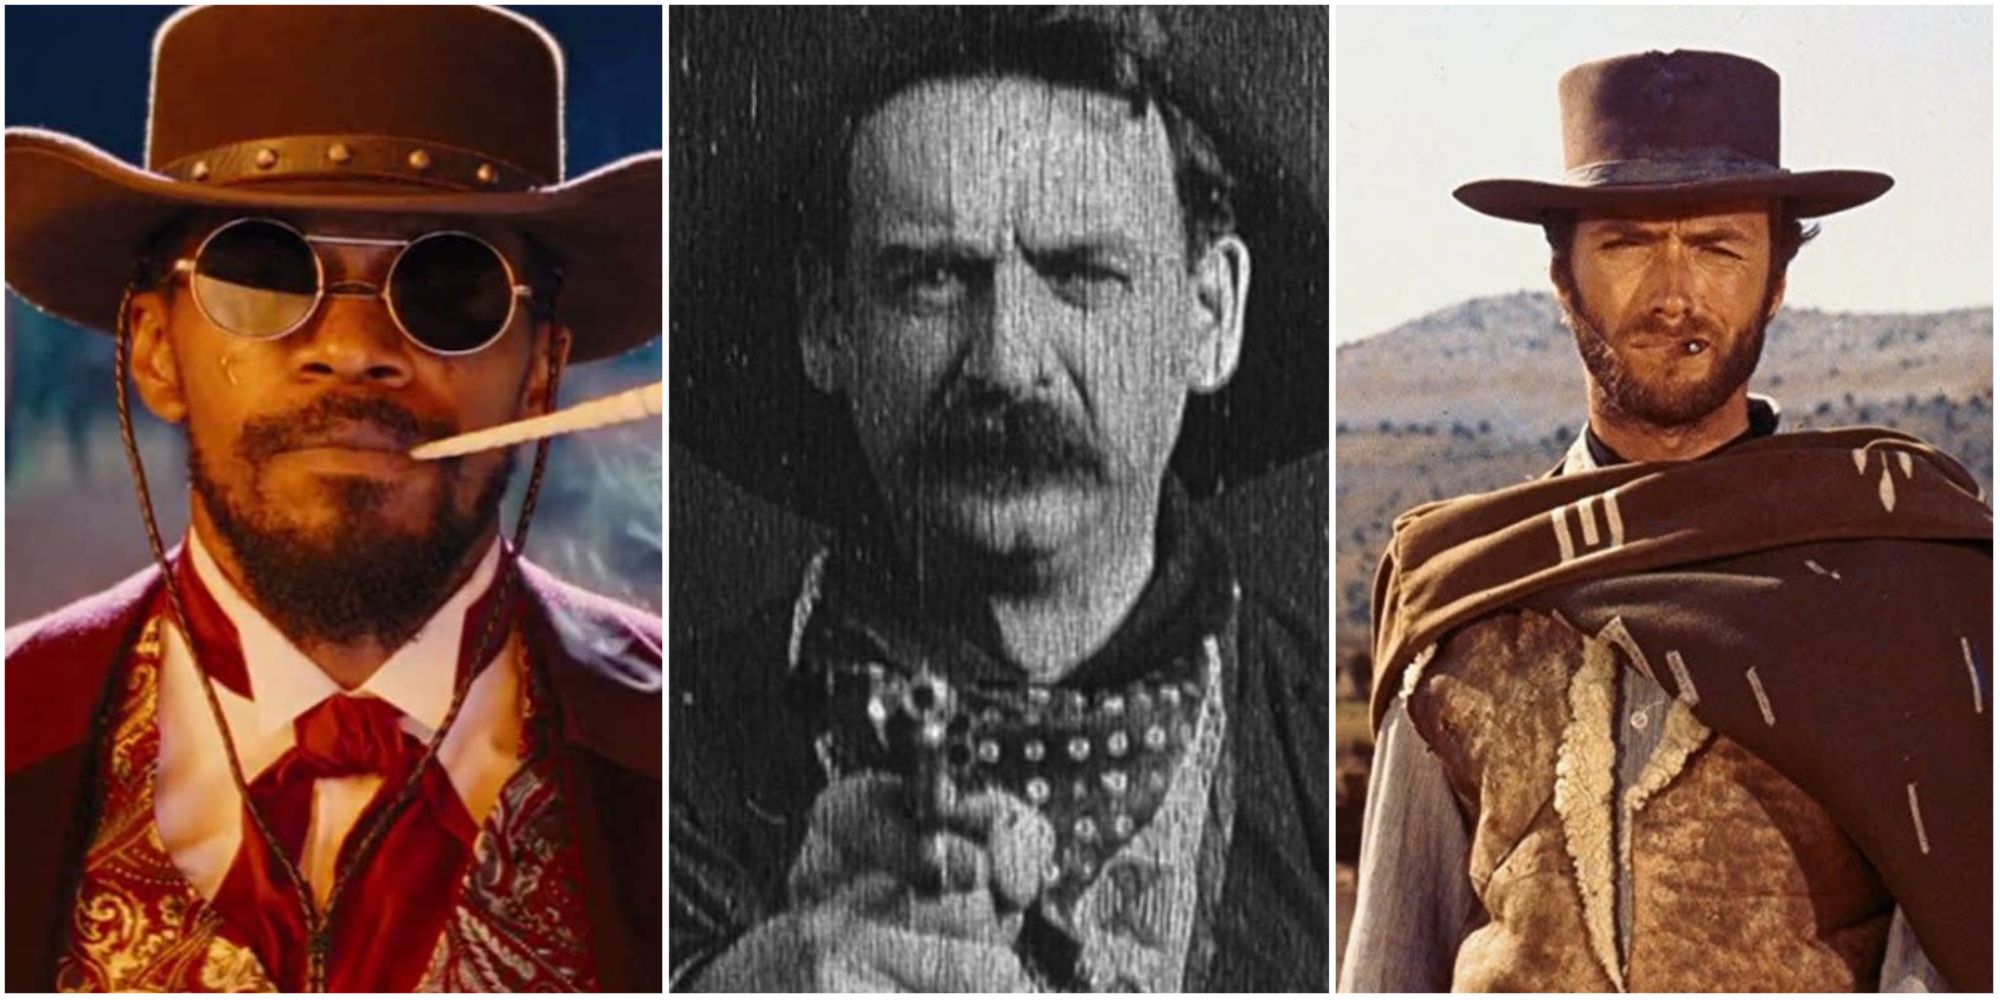 Django Unchained The Great Train Robbery and The Good, the Bad and the Ugly